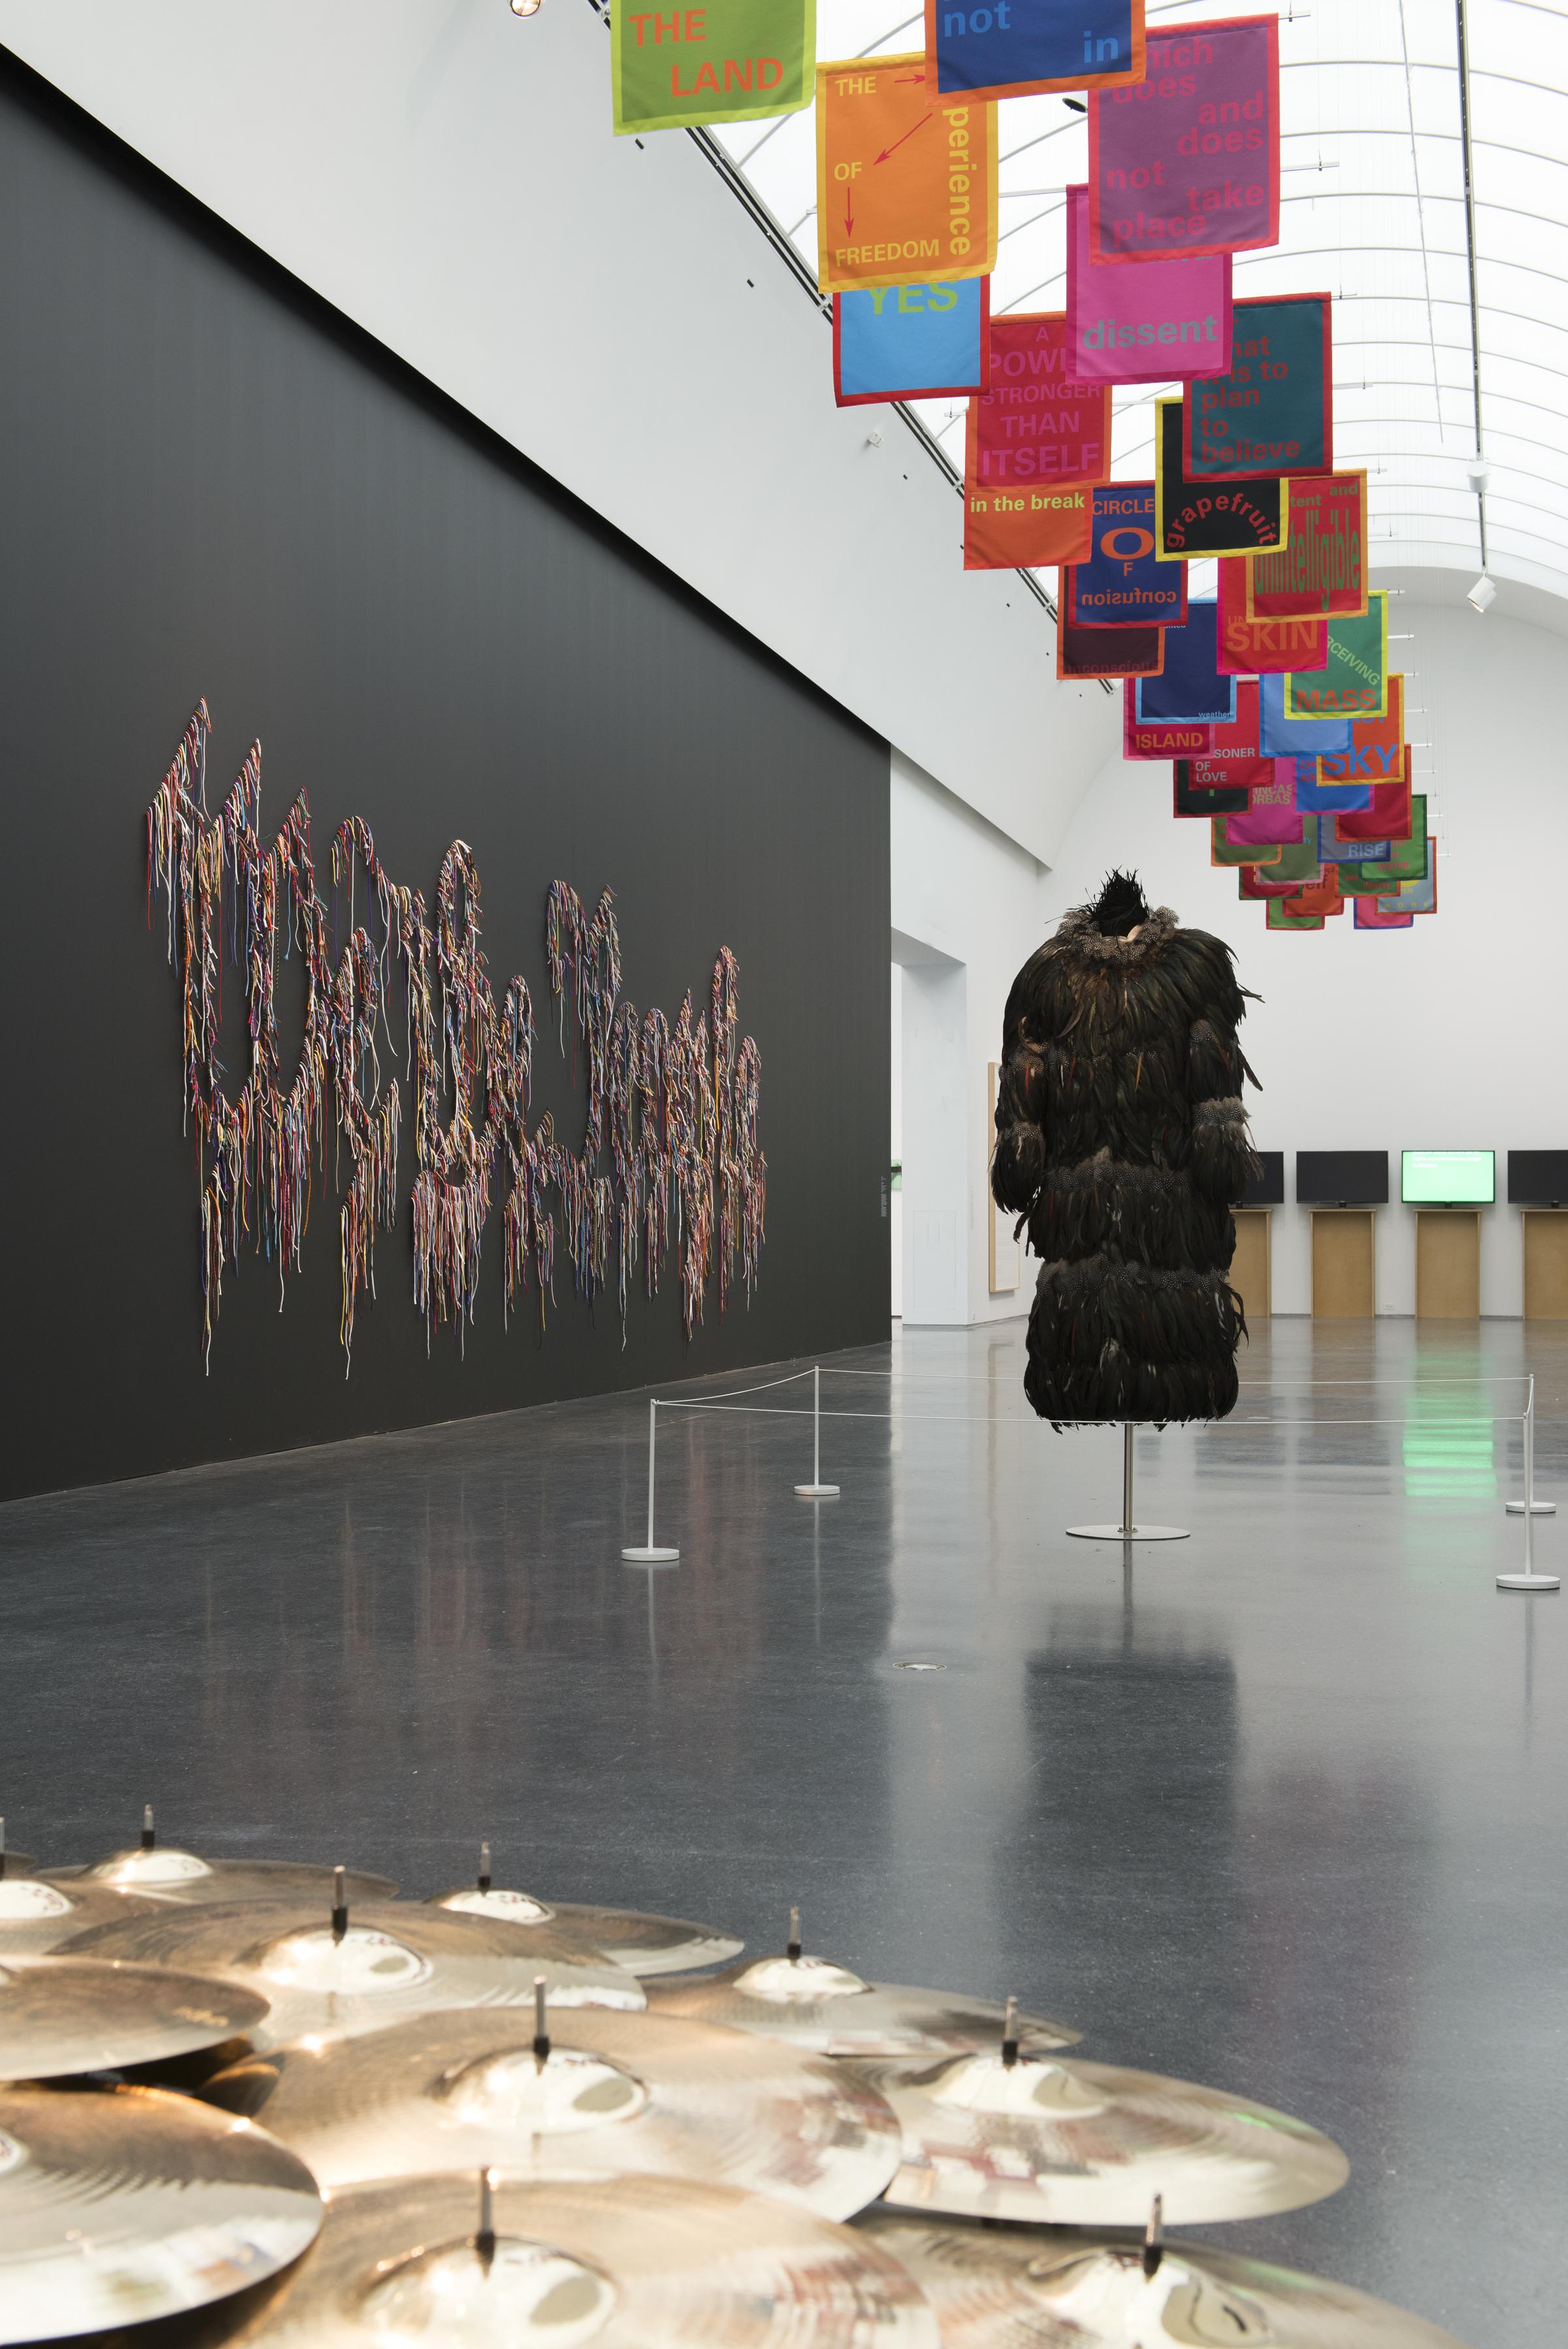 A feathered coat is displayed in the middle of a gallery, cymbals are in the foreground, and "We the People" is written on the black wall. To the left, colorful banners hang from the ceiling.